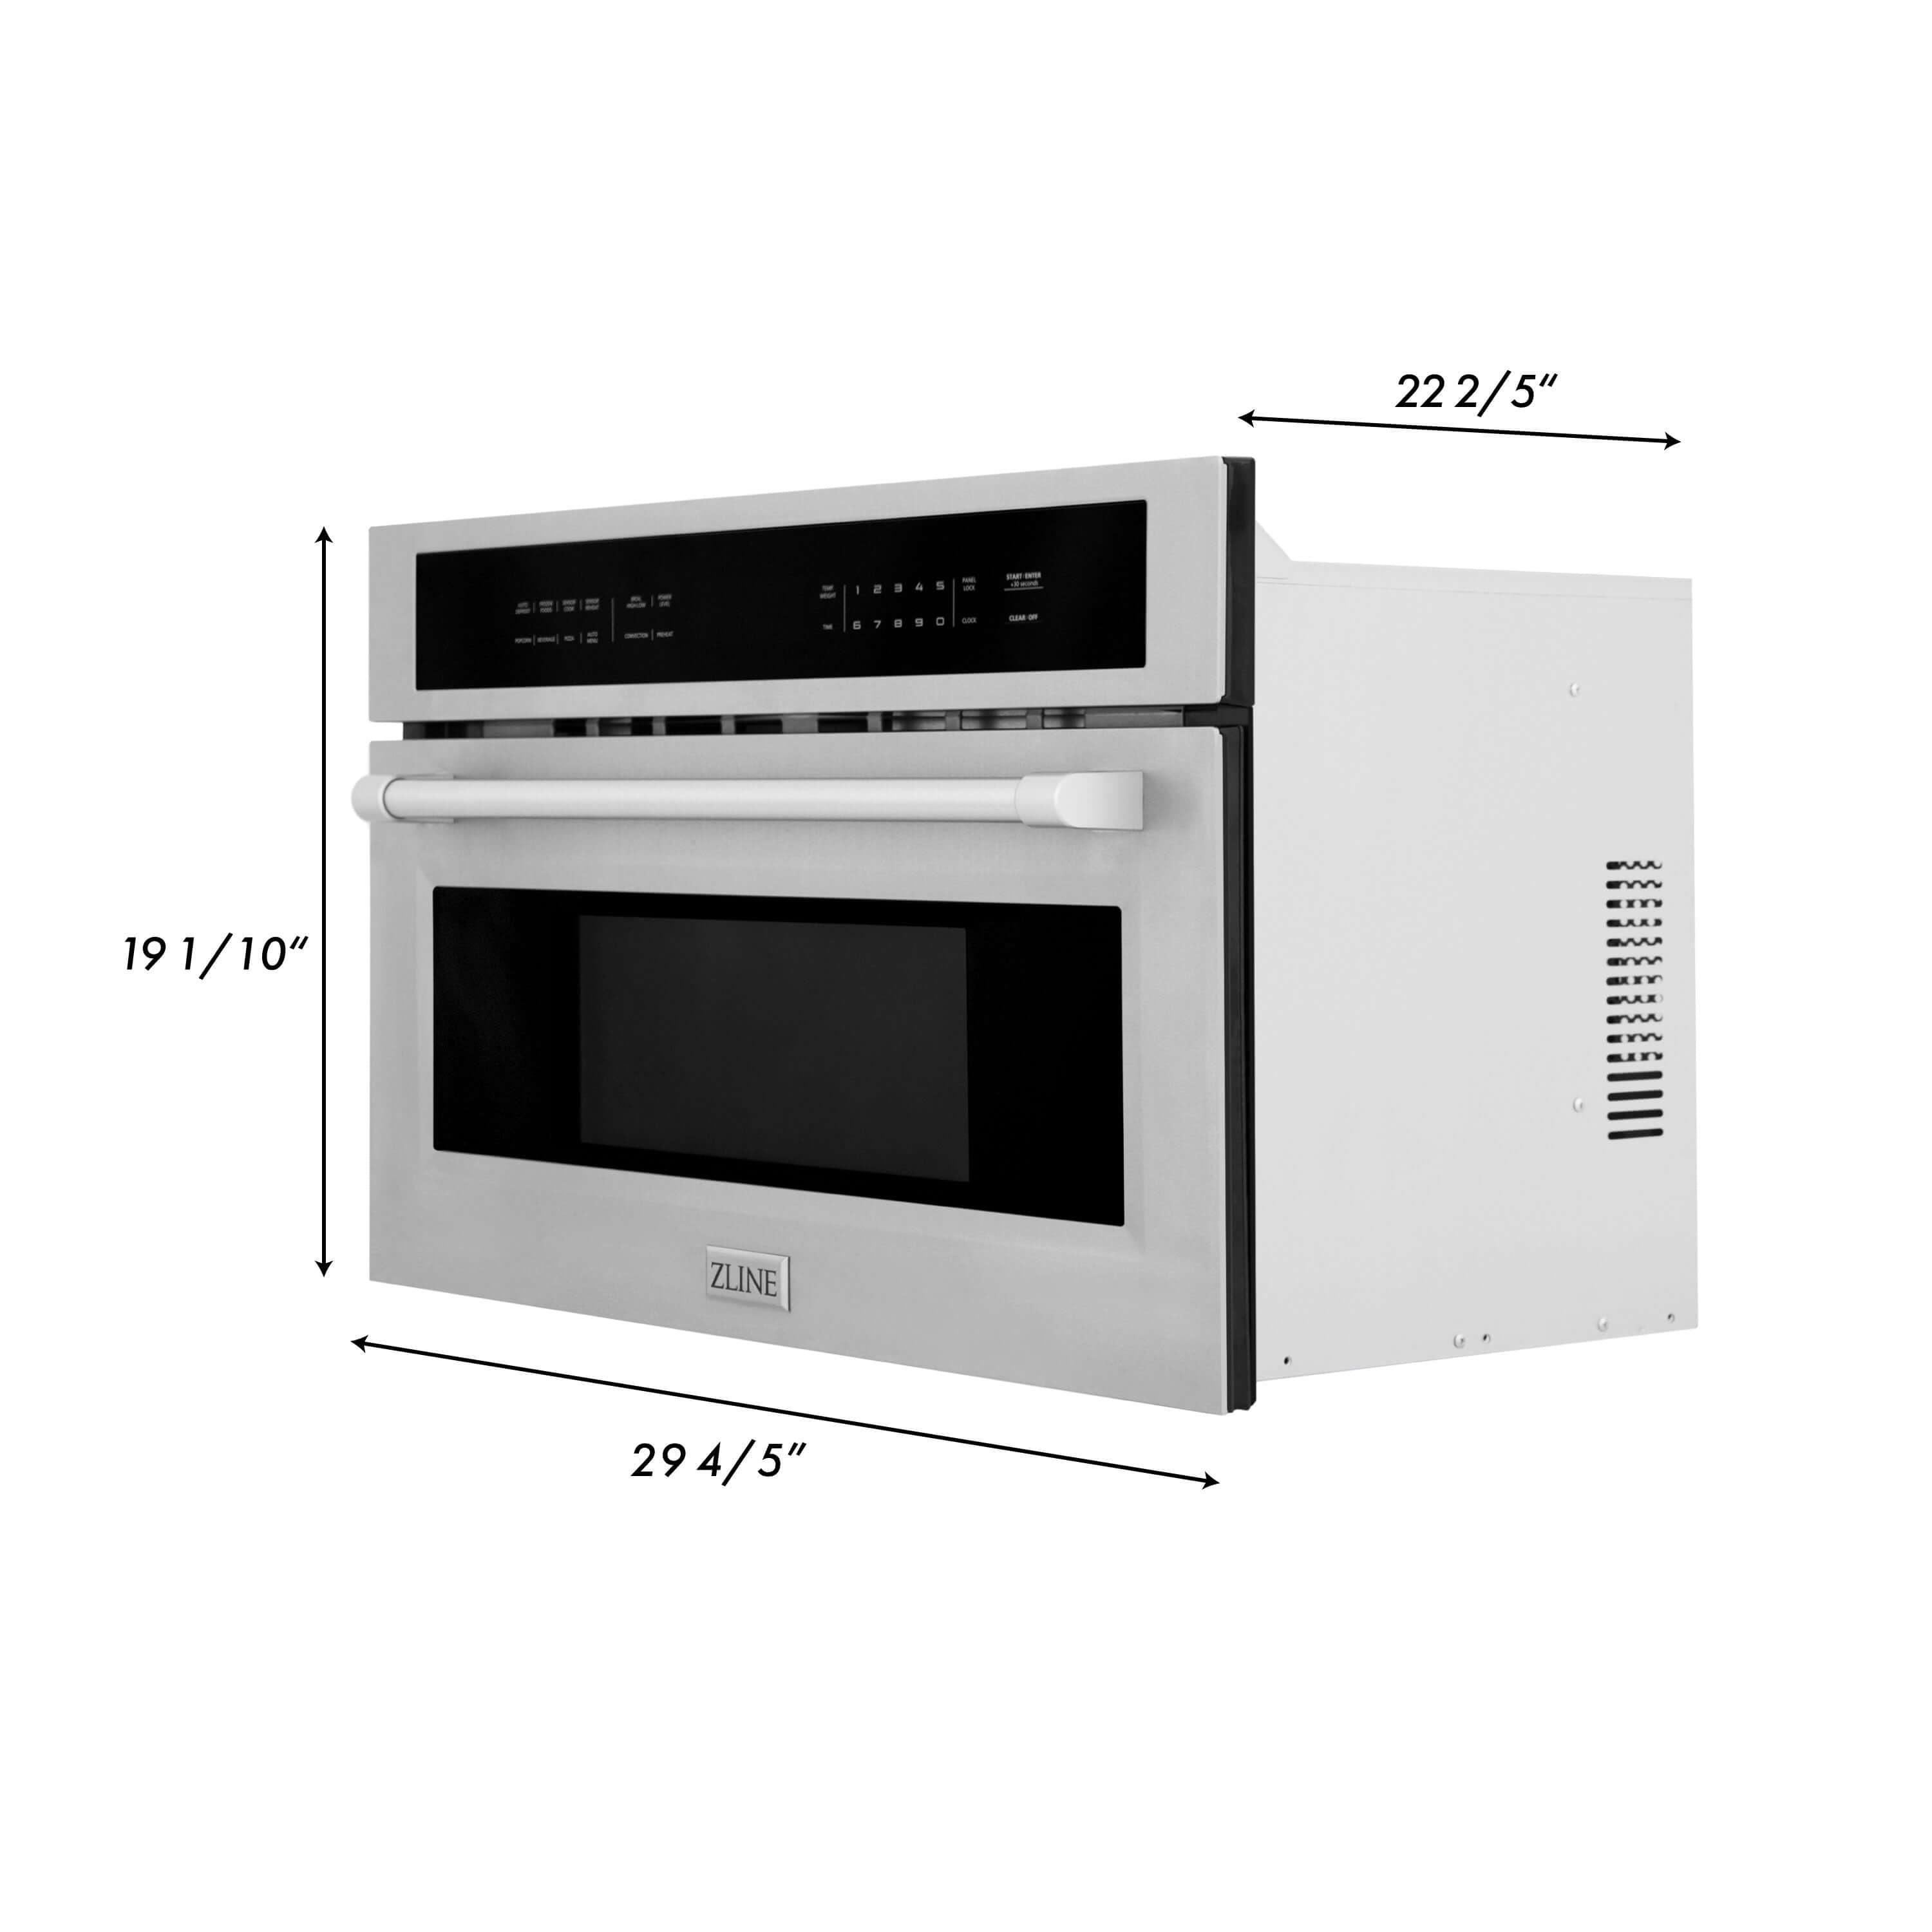 ZLINE Stainless Steel 30 in. Built-in Convection Microwave Oven Dimensions